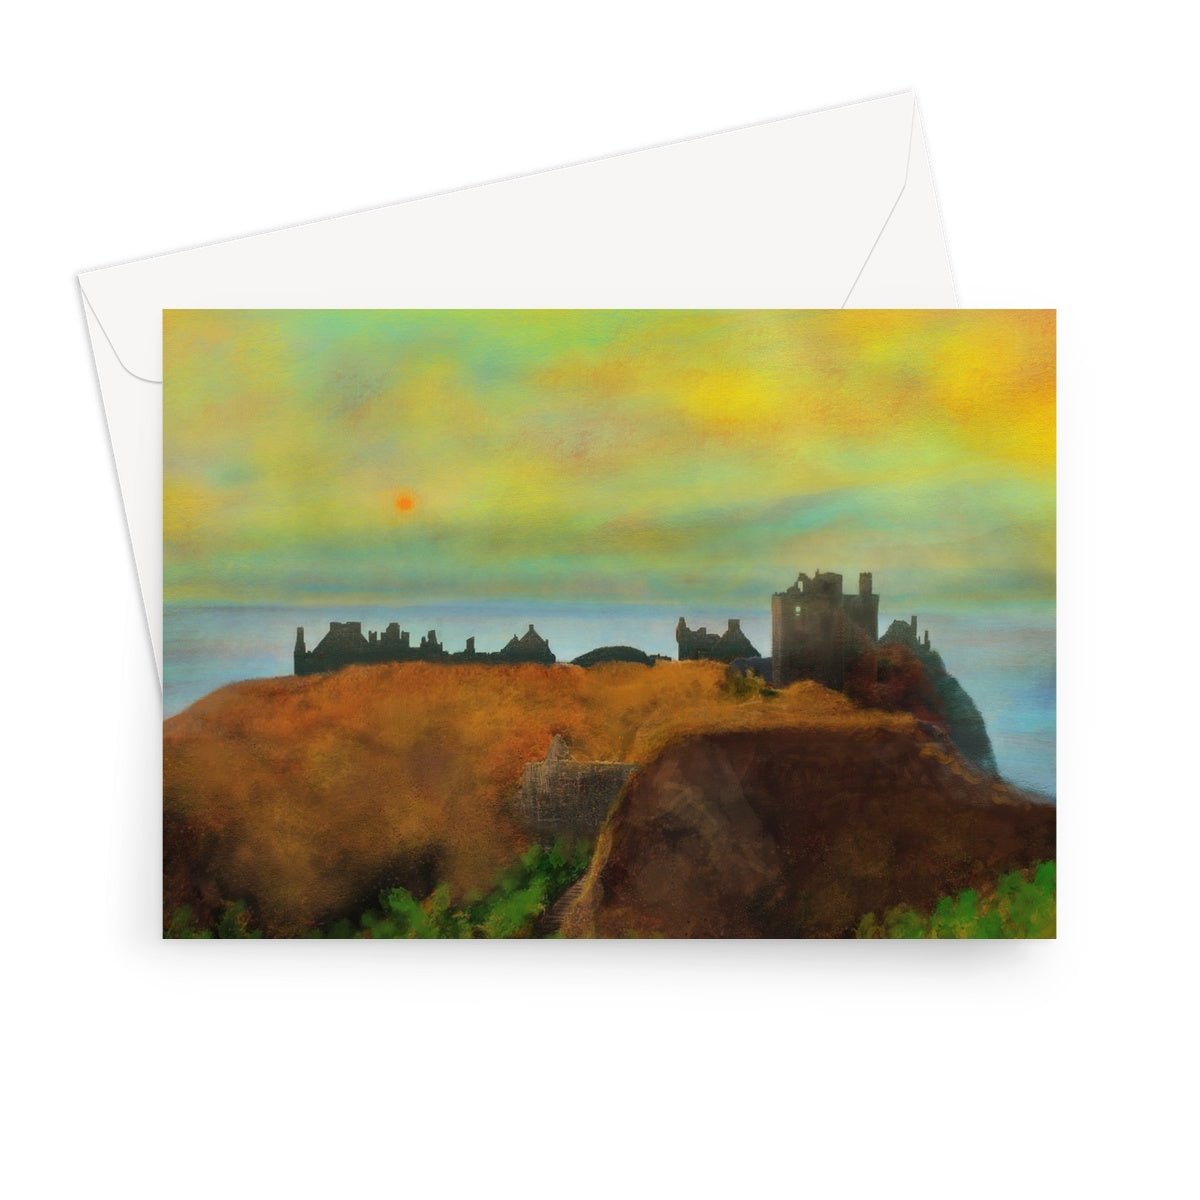 Dunnottar Castle Art Gifts Greeting Card-Greetings Cards-Scottish Castles Art Gallery-7"x5"-10 Cards-Paintings, Prints, Homeware, Art Gifts From Scotland By Scottish Artist Kevin Hunter